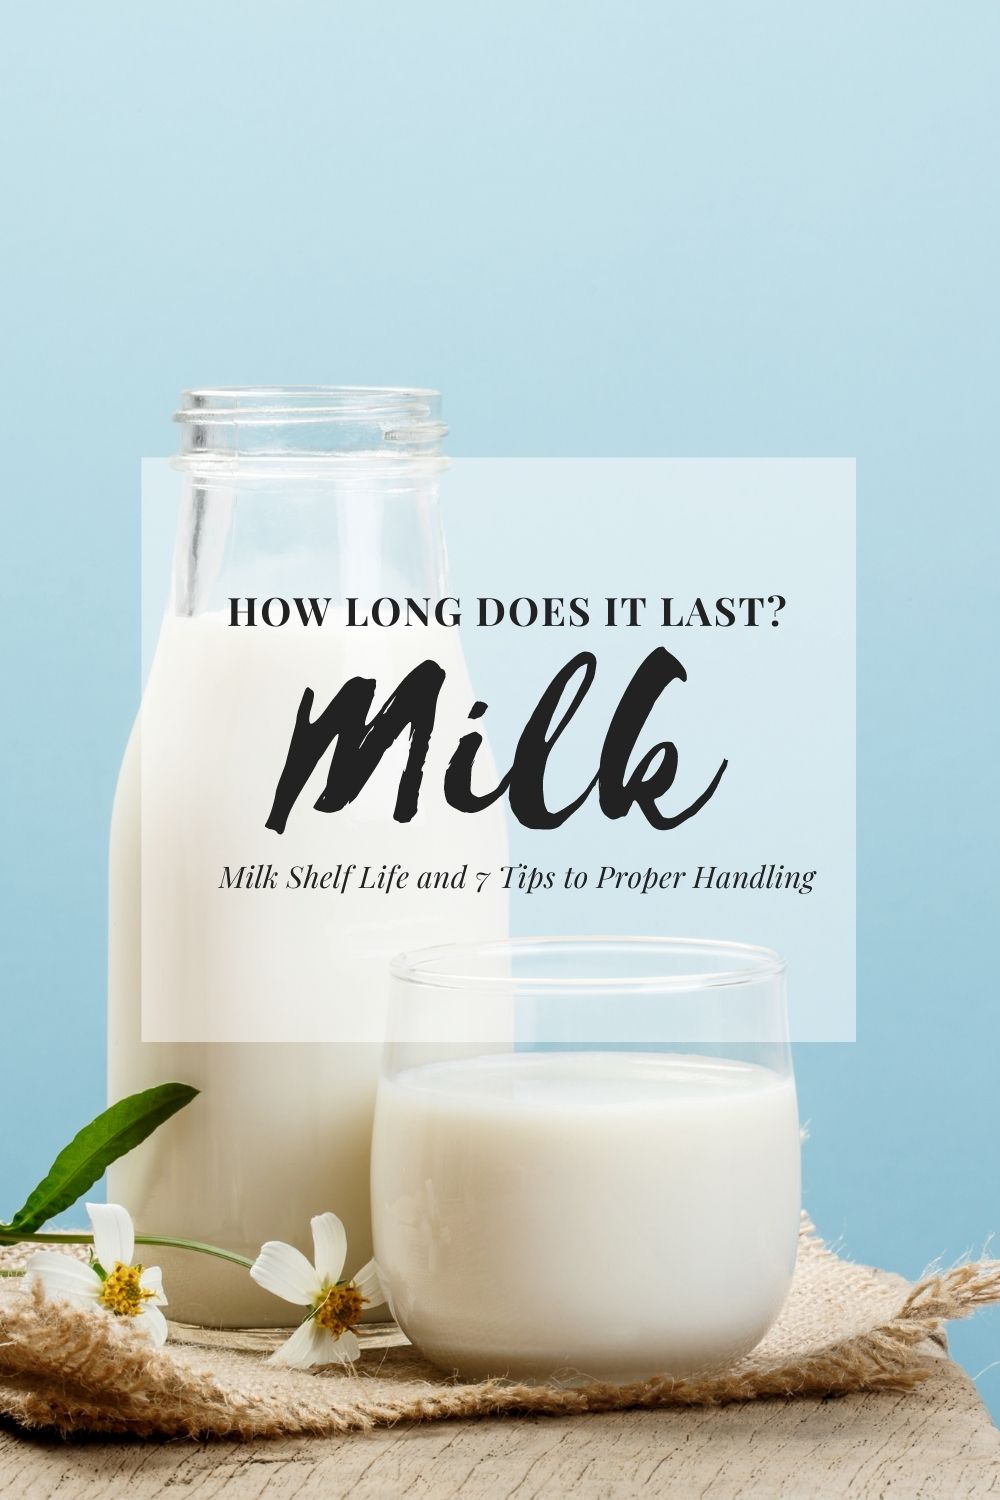 How Long Does Milk Last? Milk Shelf Life and 7 Tips to Proper Handling